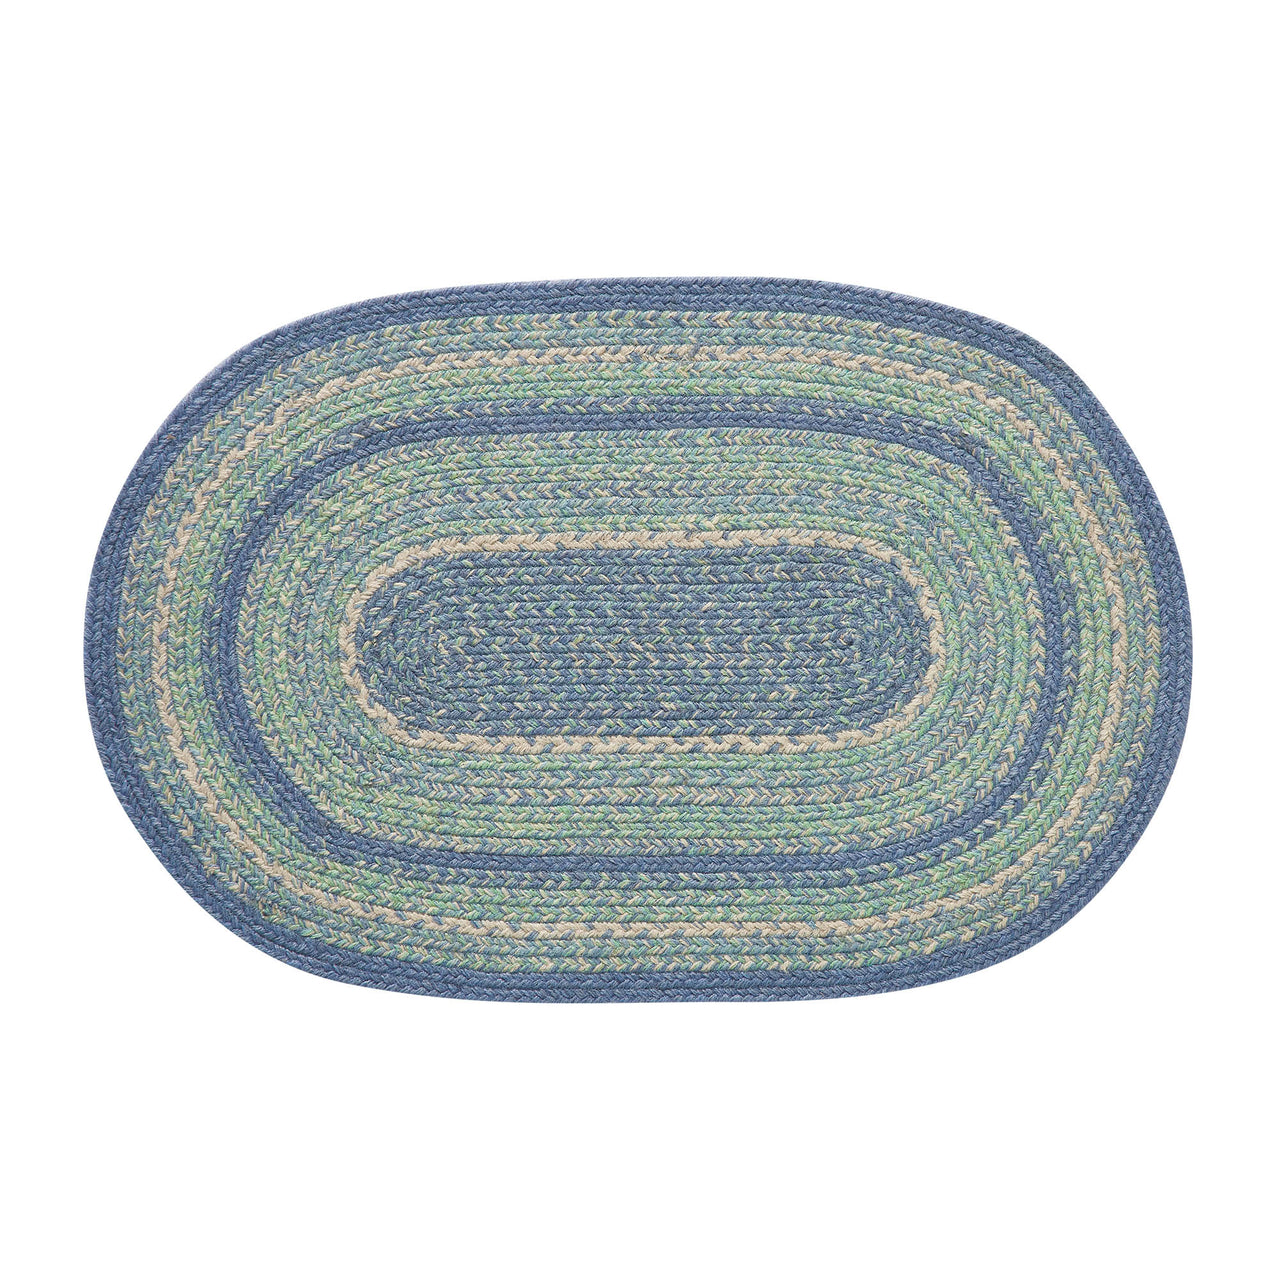 Jolie Braided Jute Oval Braided Rugs with Rug Pad - VHC Brands